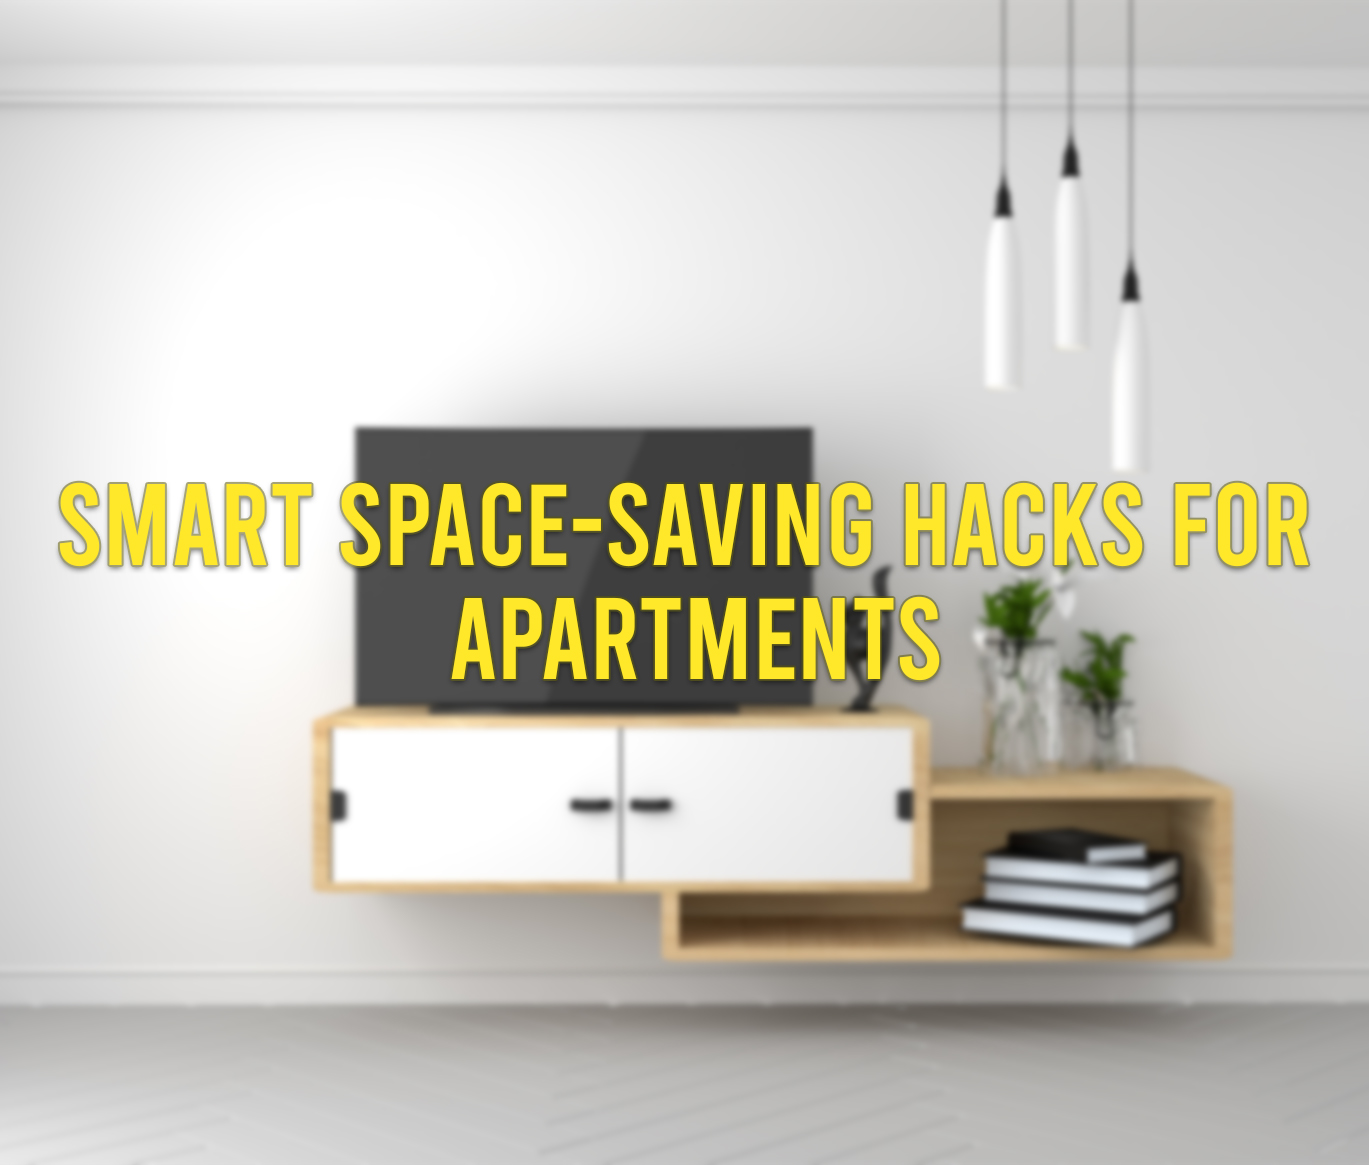 Smart Space-saving Hacks for apartments